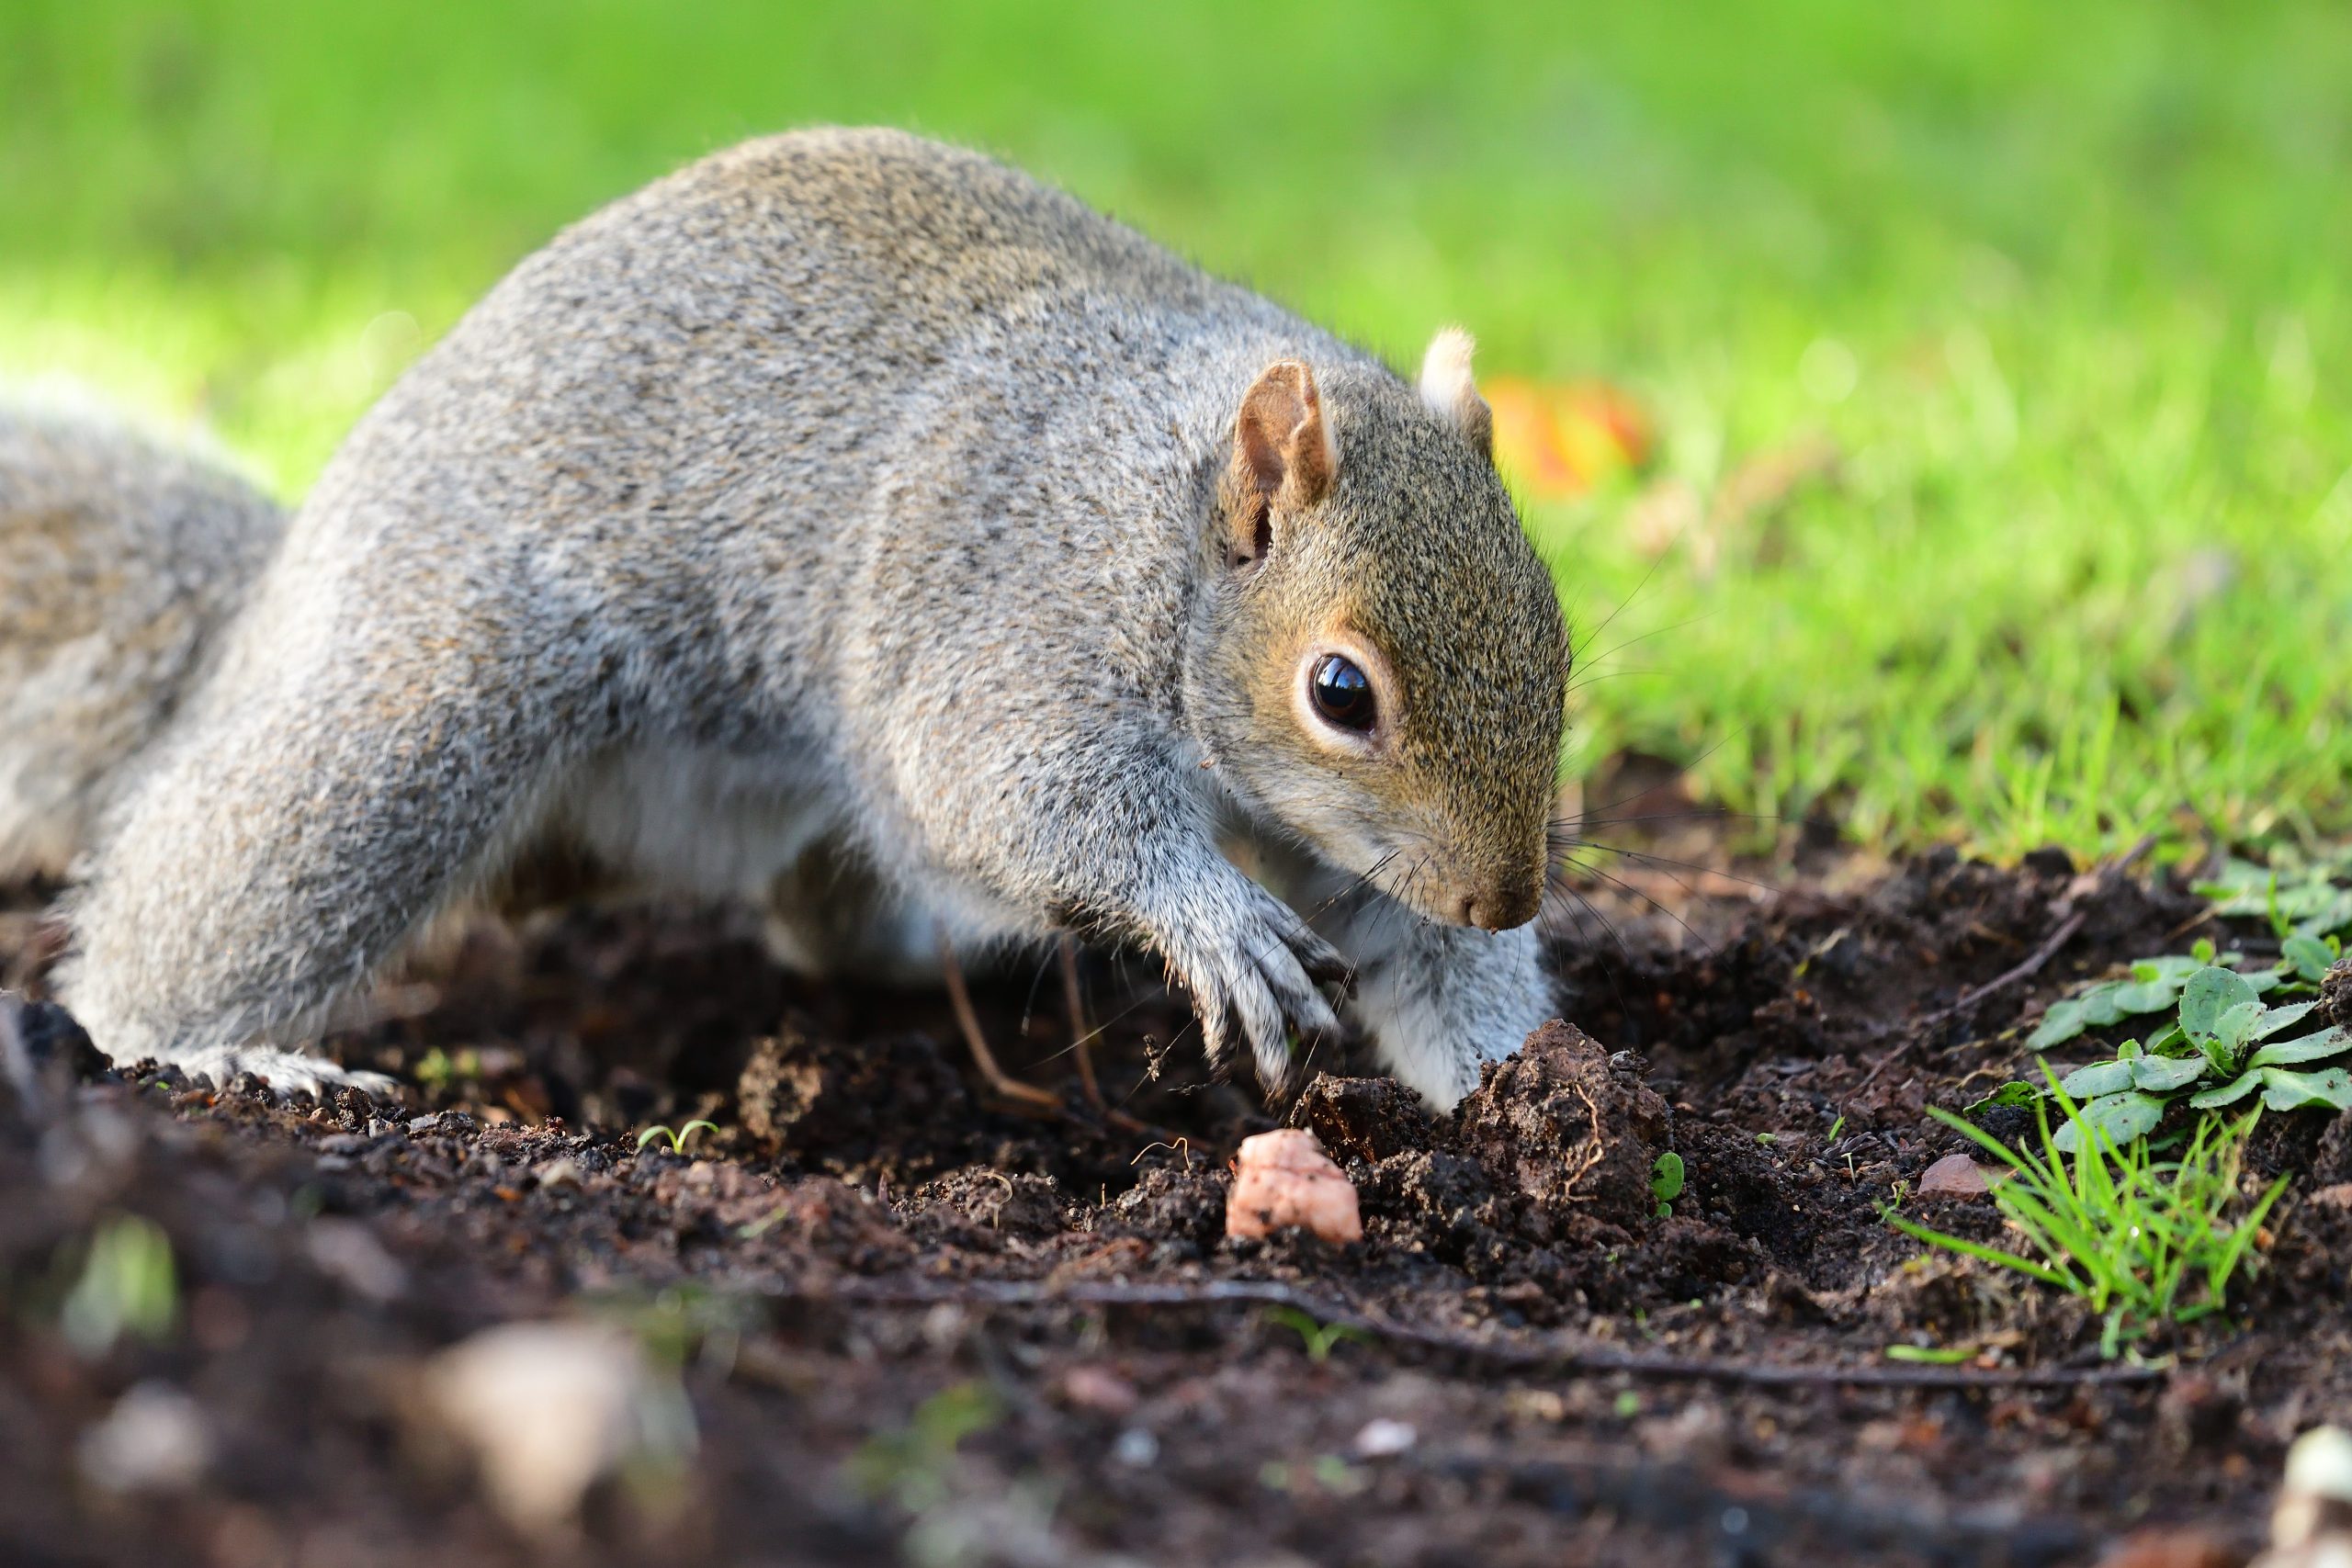 Plantskydd granular repellent will keep squirrels from digging in your yard